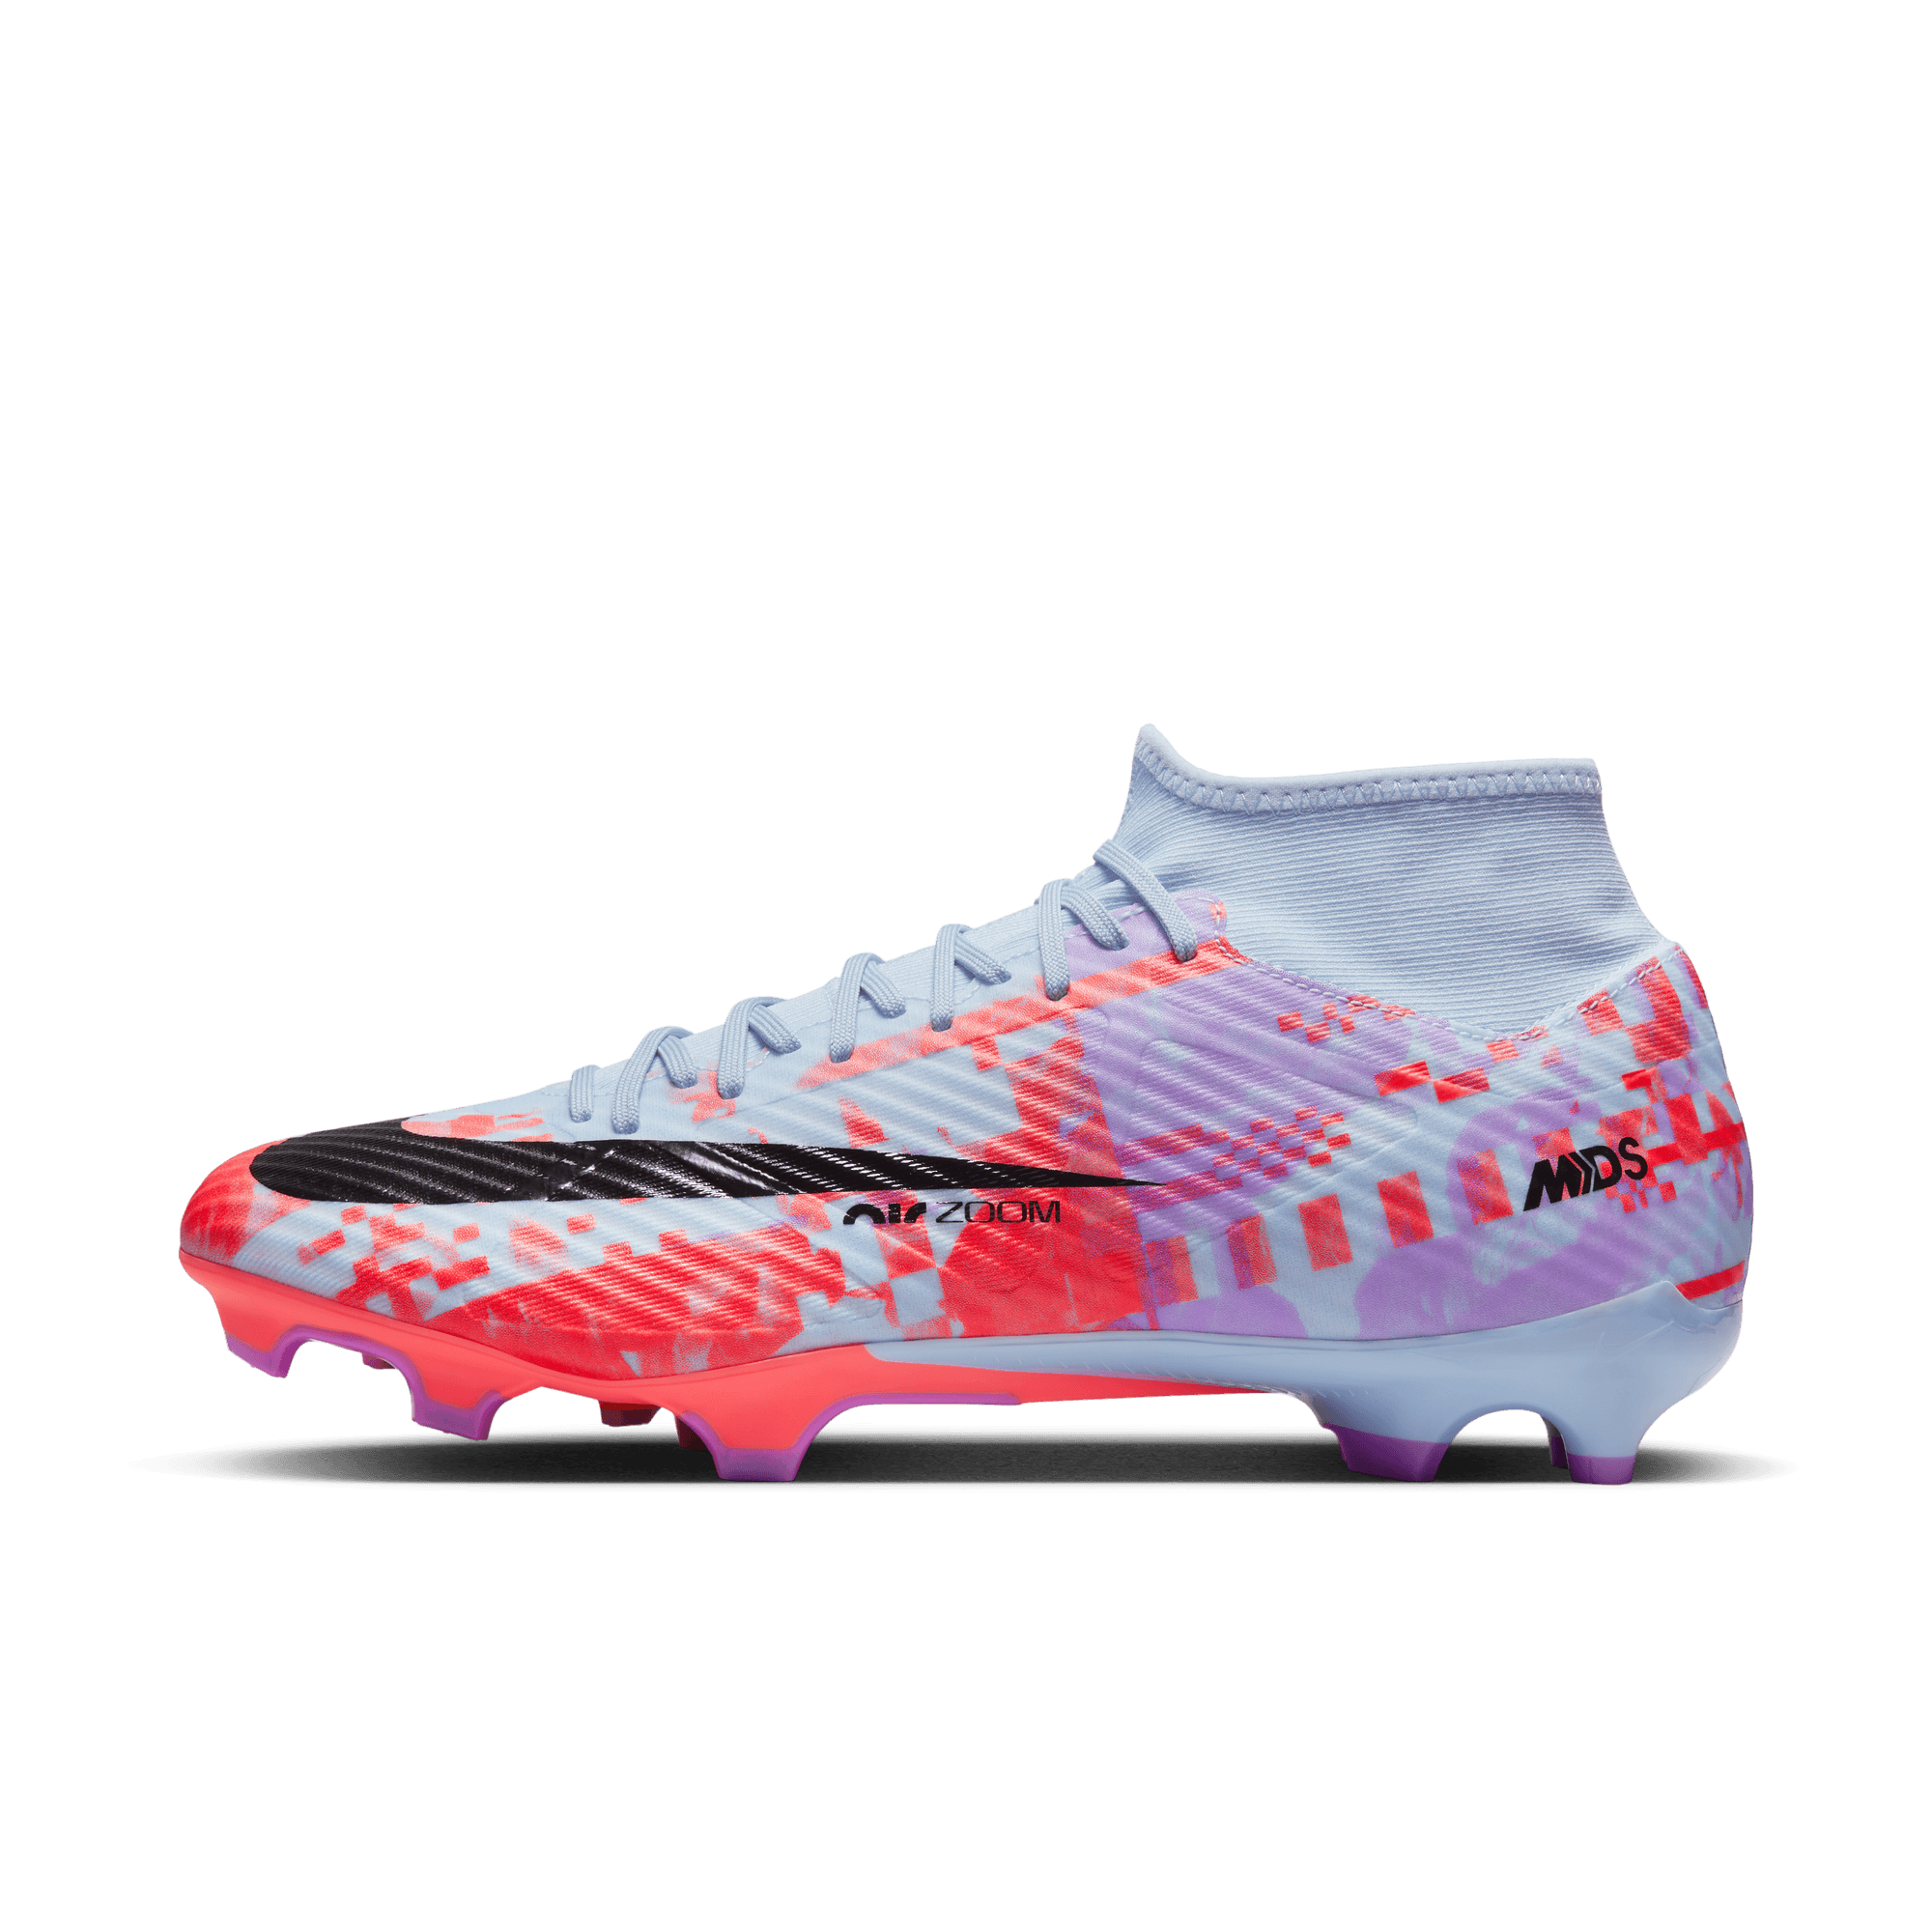 globo collar mordaz stefanssoccer.com:Nike Zoom MDS Superfly 9 Academy Firm Ground Cleats -  Blue / Pink